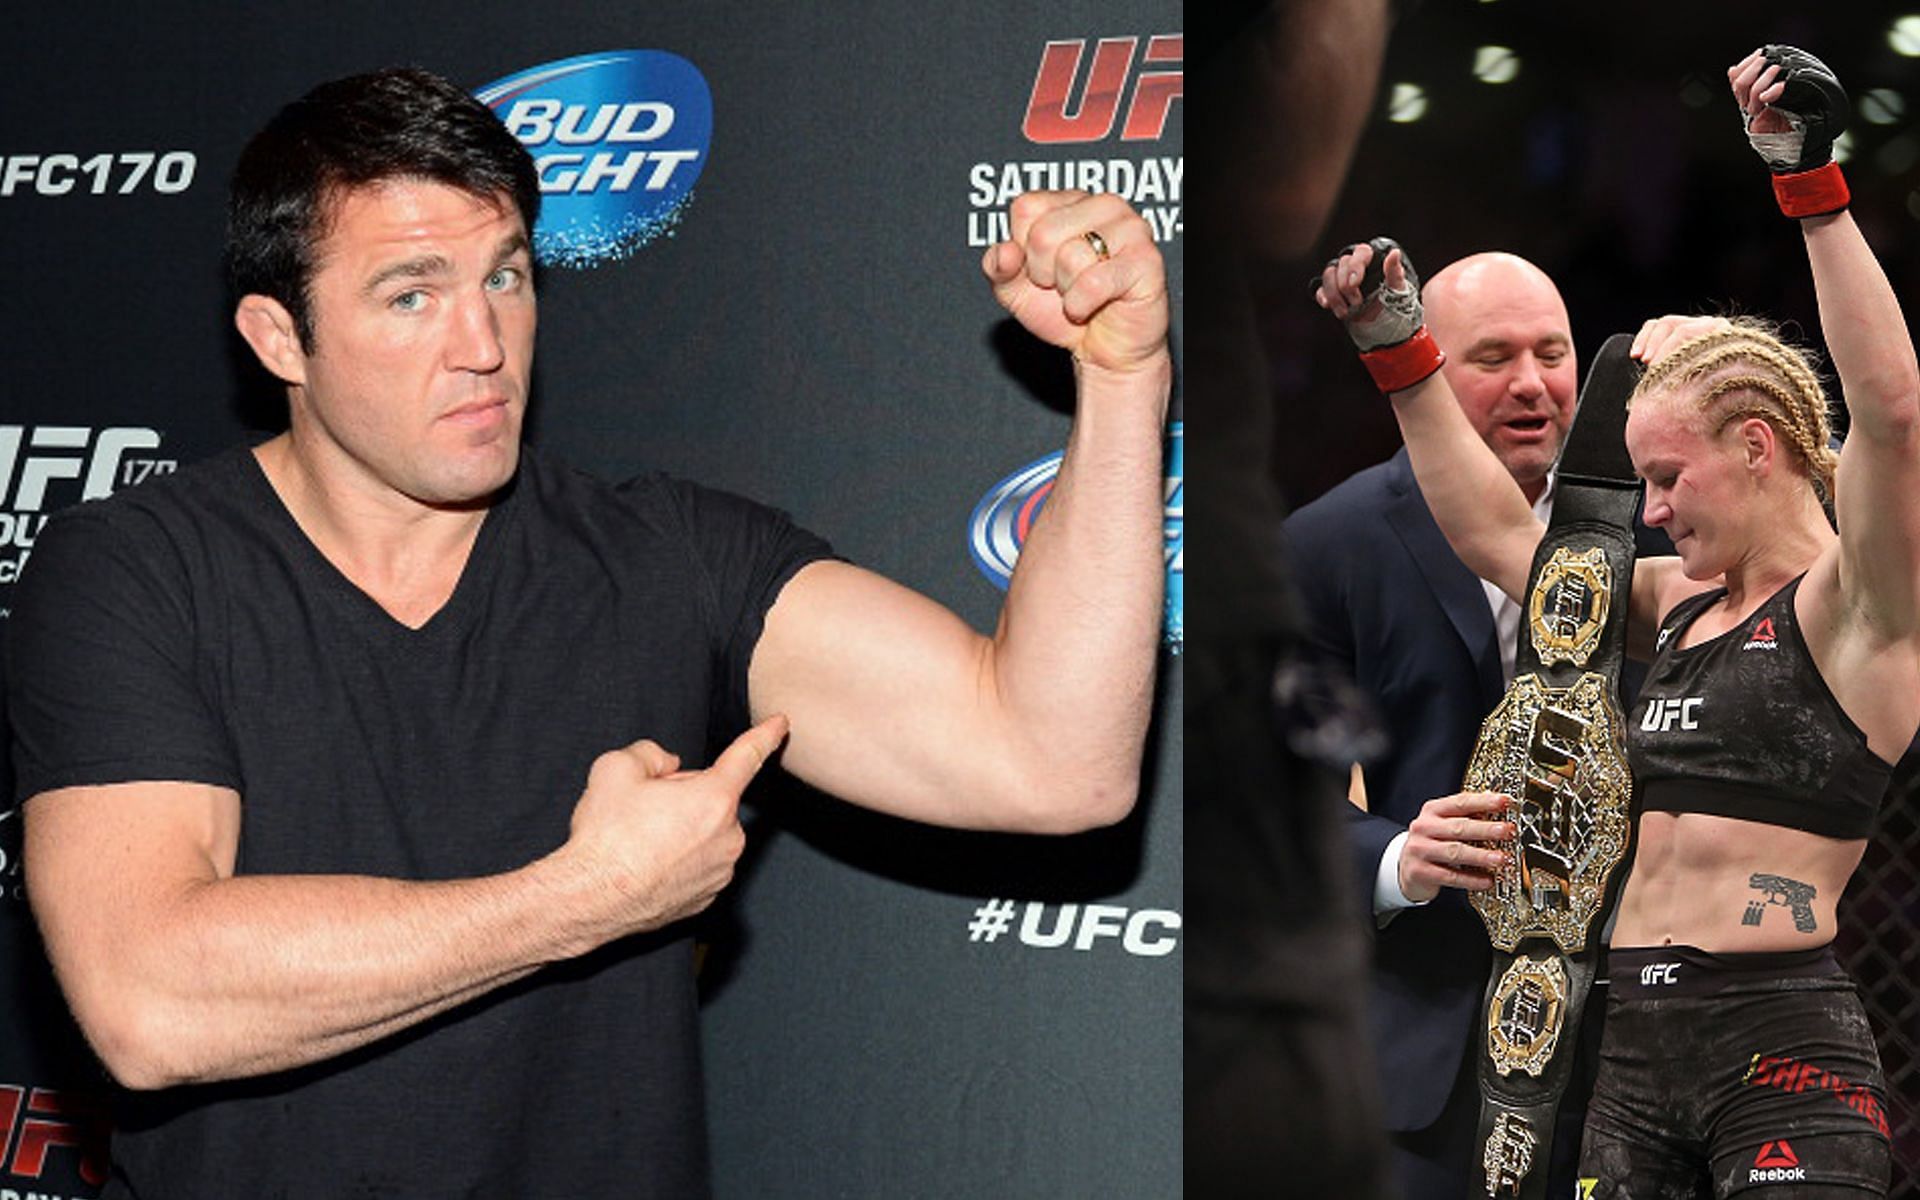 Chael Sonnen (left) and Valentina Shevchenko (right) [Images Courtesy: Getty Images]